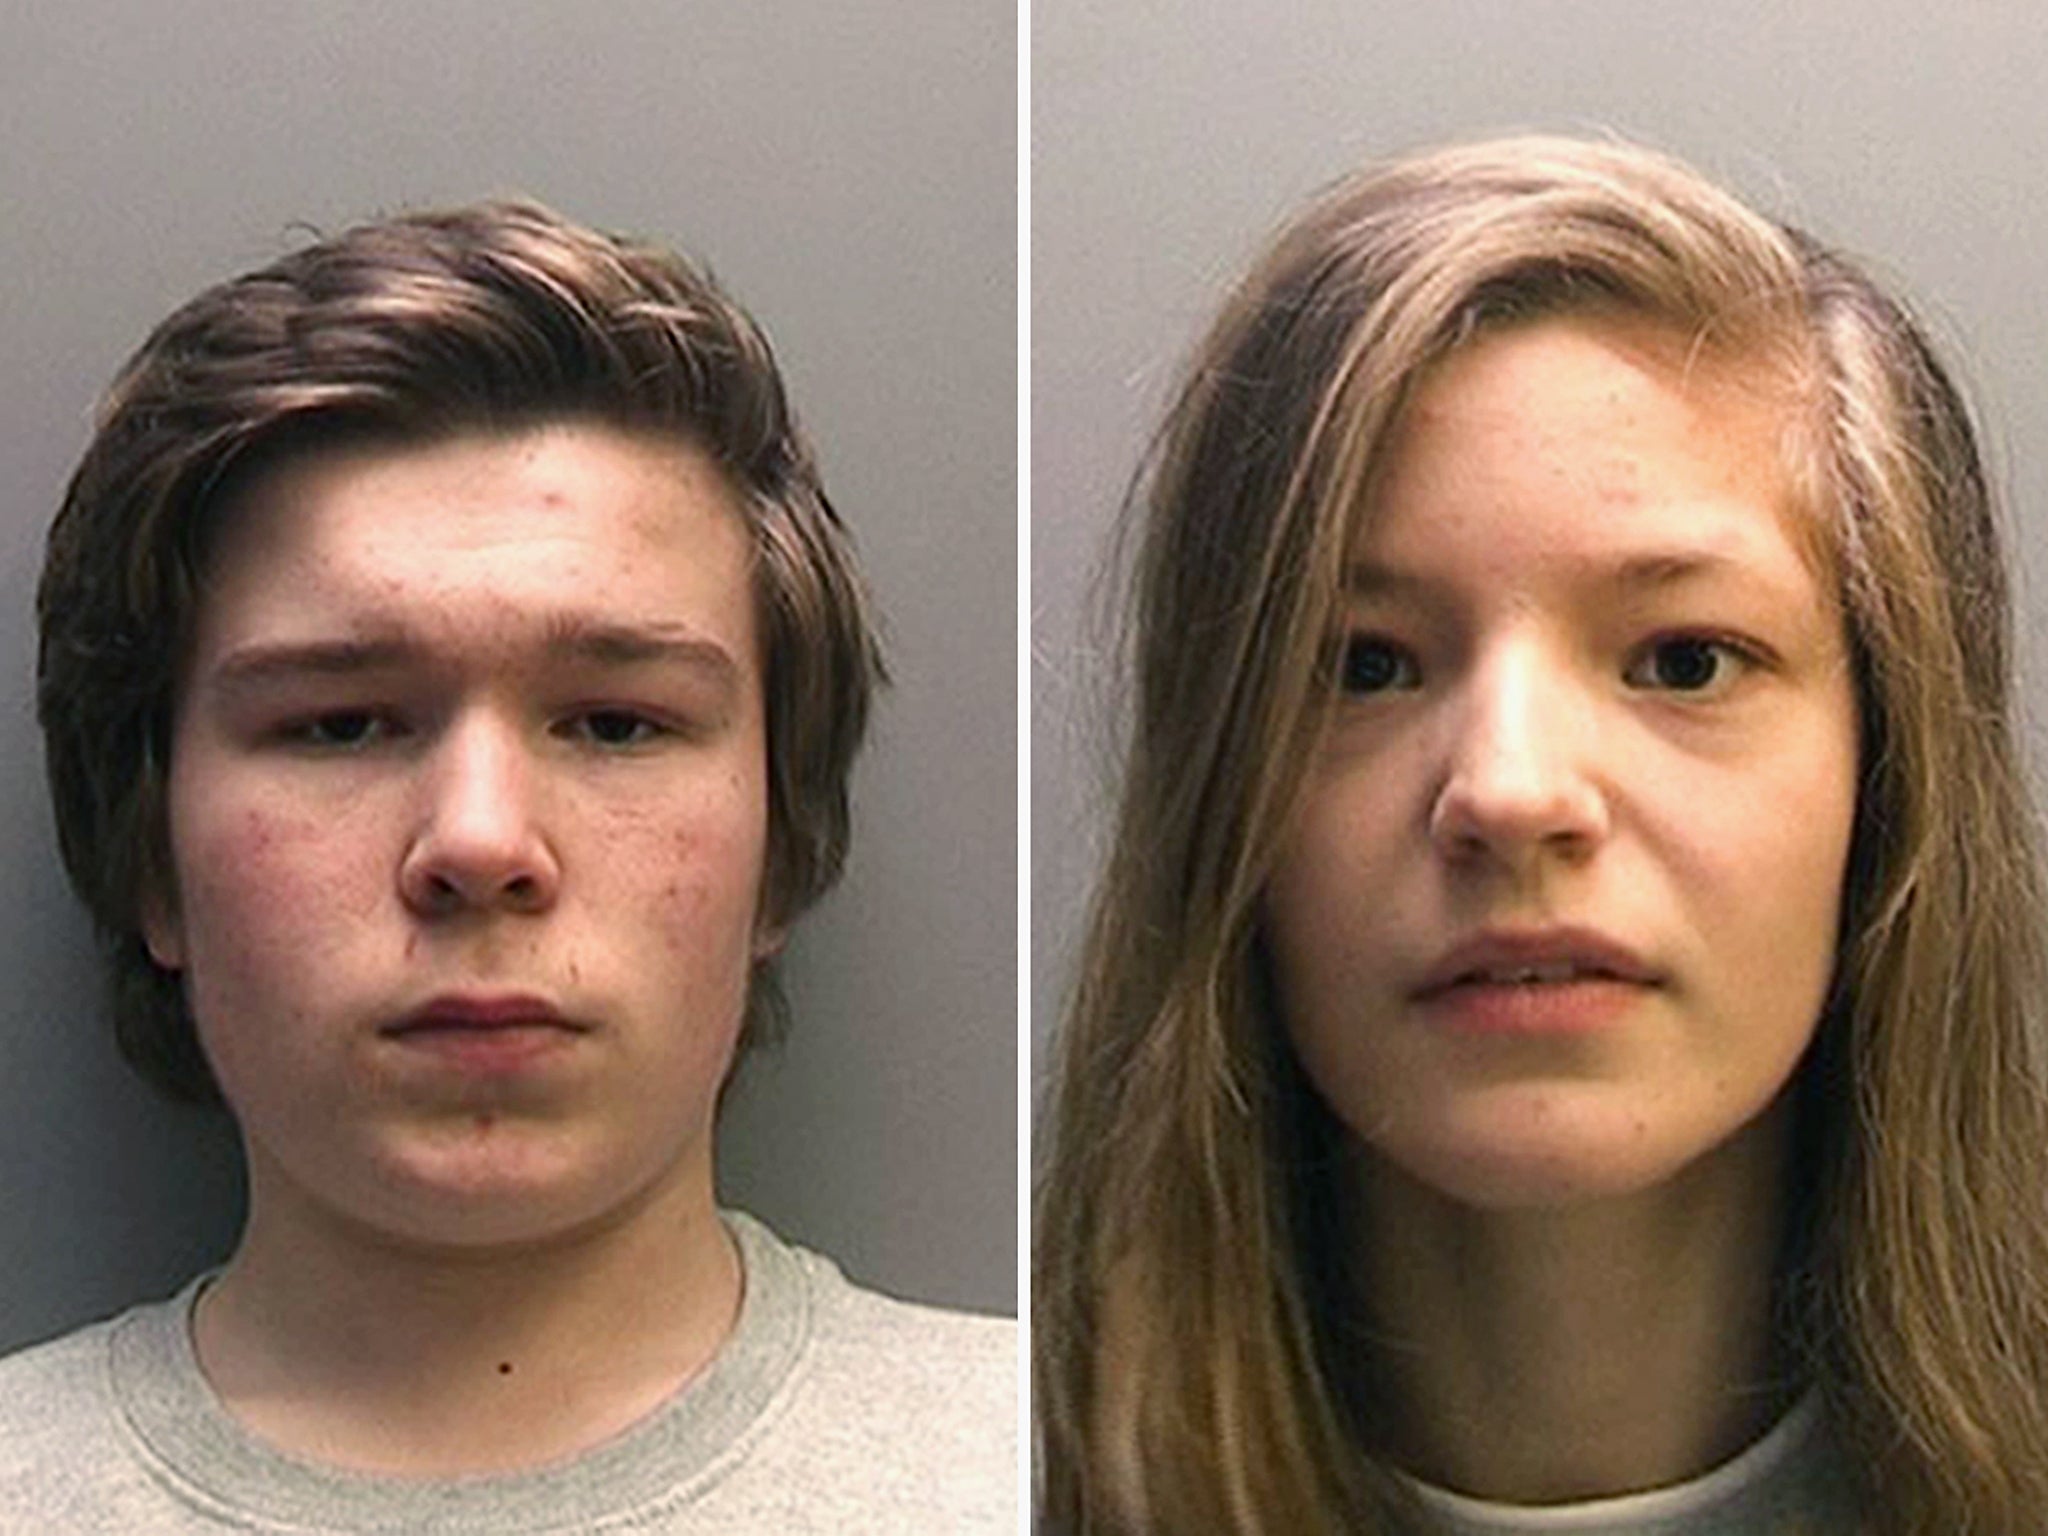 Lucas Markham and Kim Edwards, believed to be Britain's youngest double murderers, can now be named as the two 15 year olds who were convicted of murdering Edwards' mother and sister in Spalding, Lincolnshire, last April